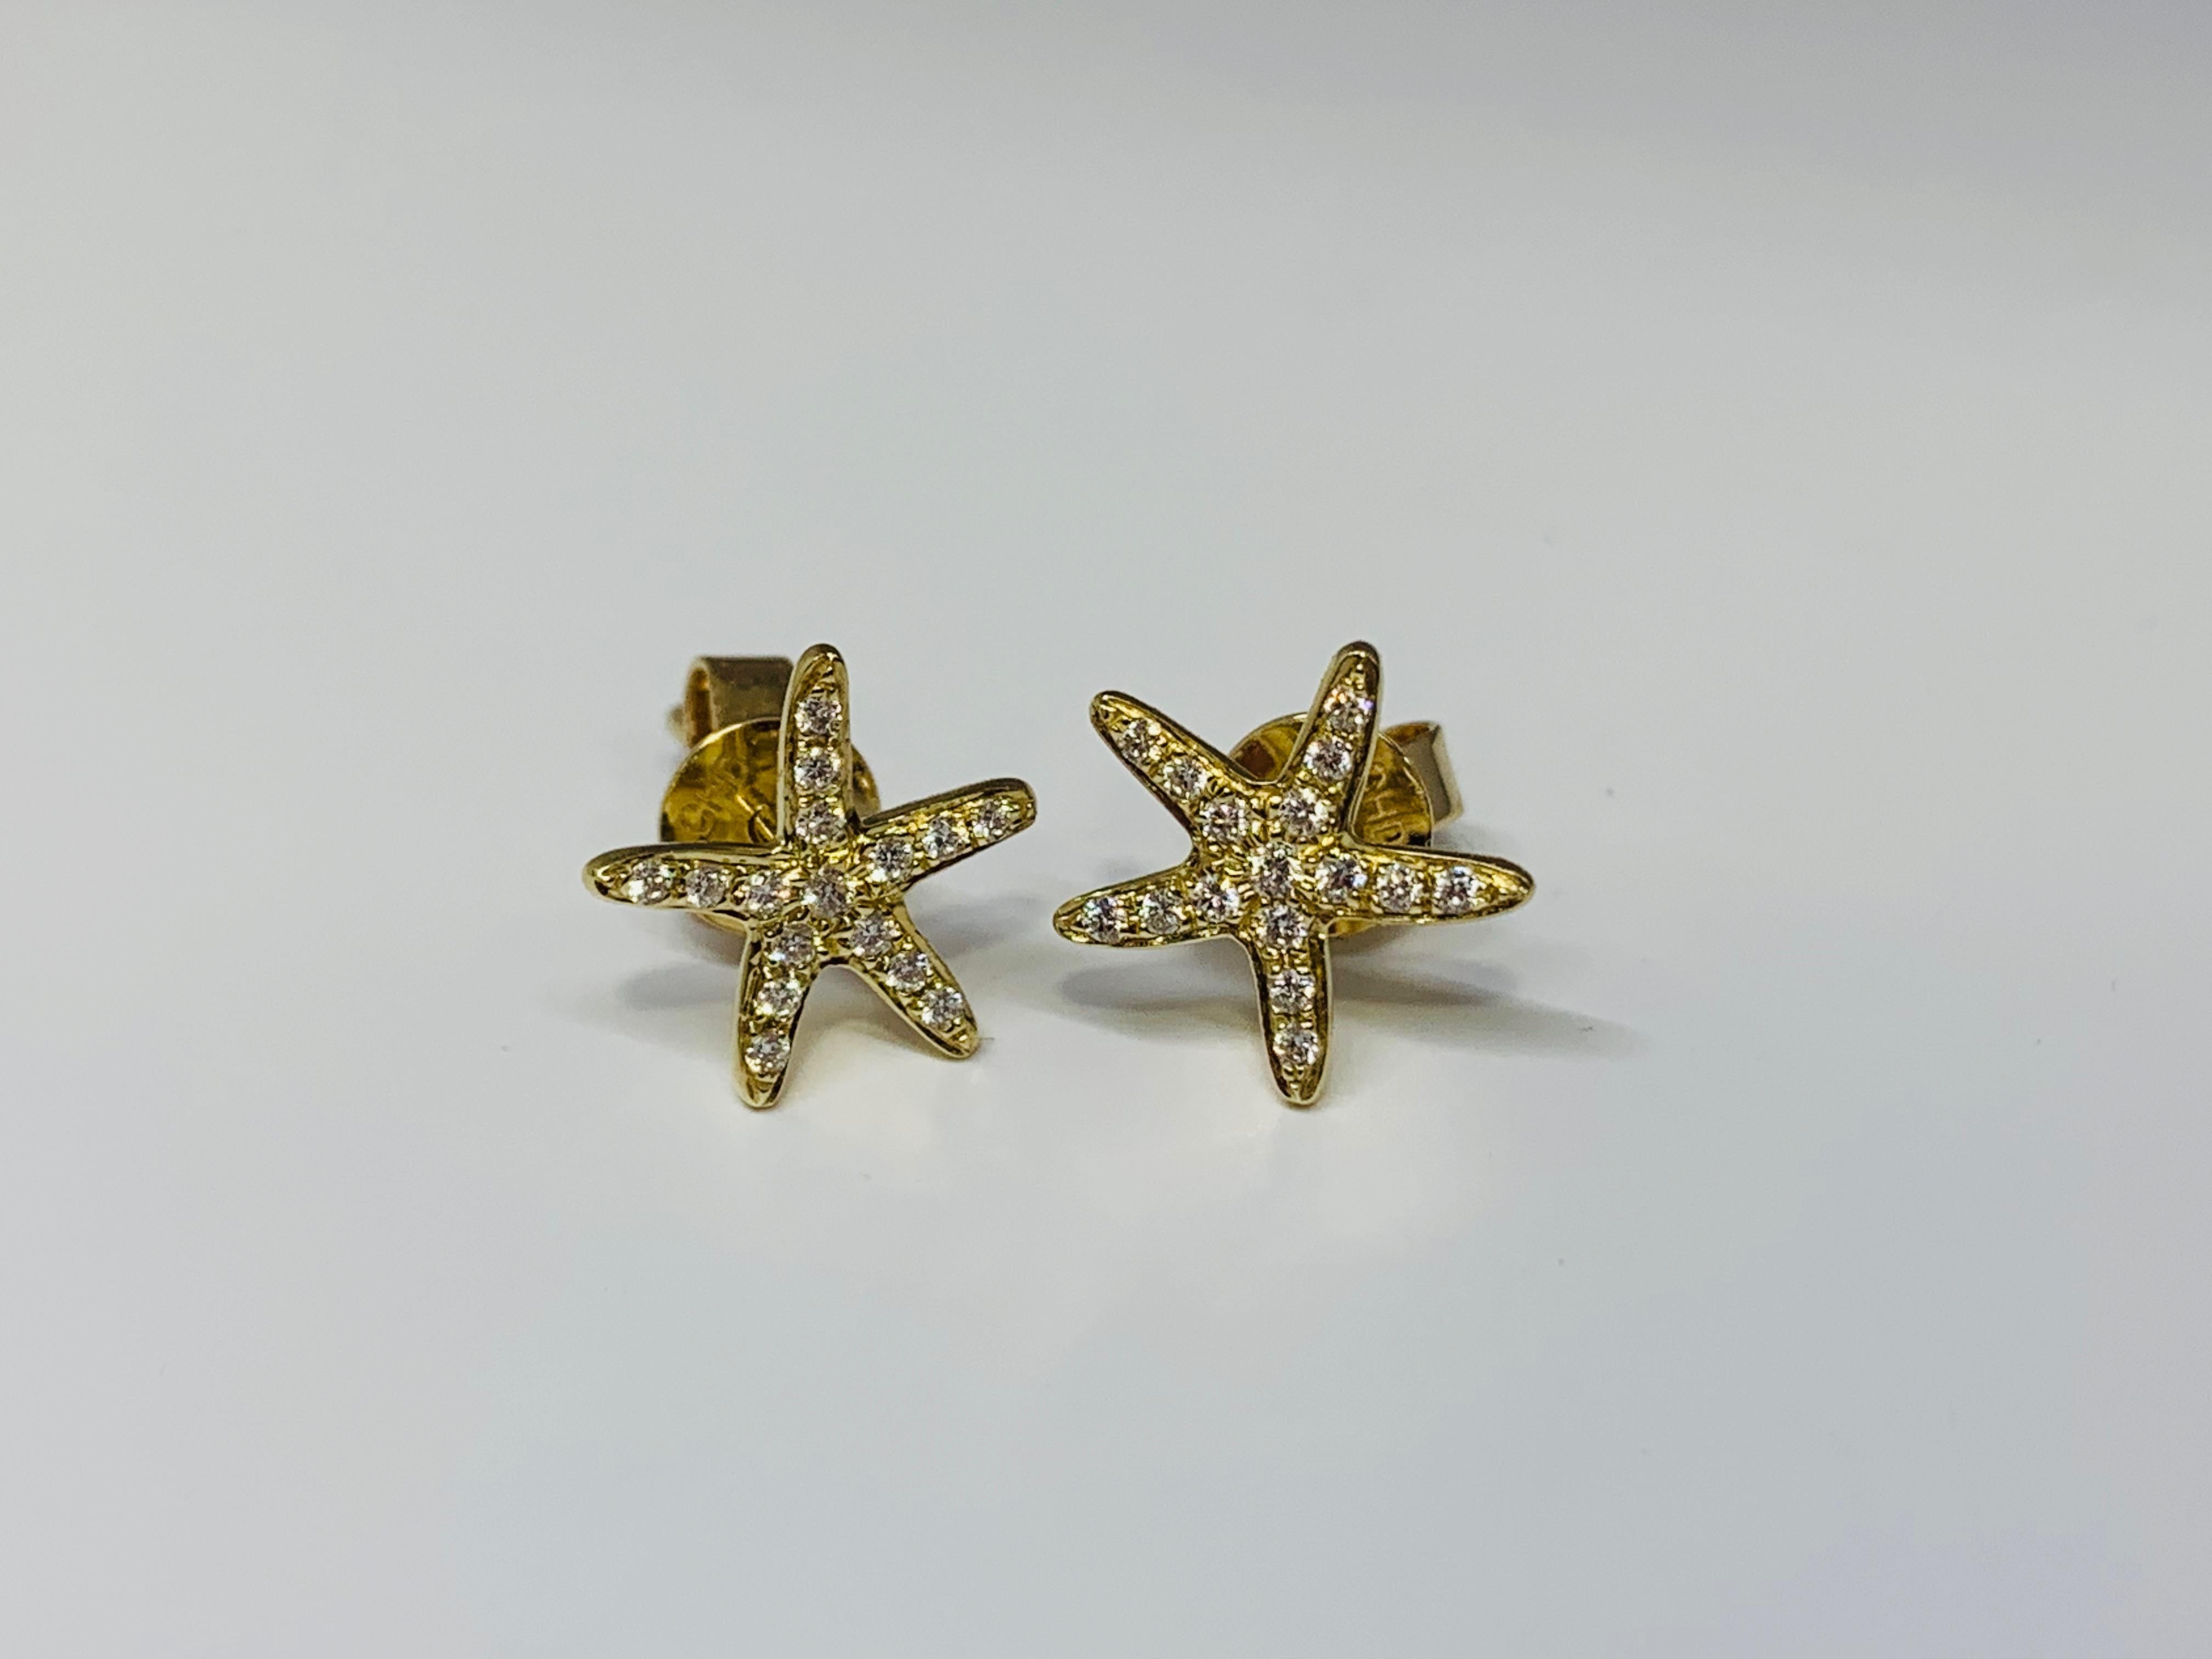 These stunning Cherie Dori Starfish earrings feature a total carat weight of 0.15 round diamonds set in 14K yellow gold with strong tension earring backings. Each of the starfish measure 1/2